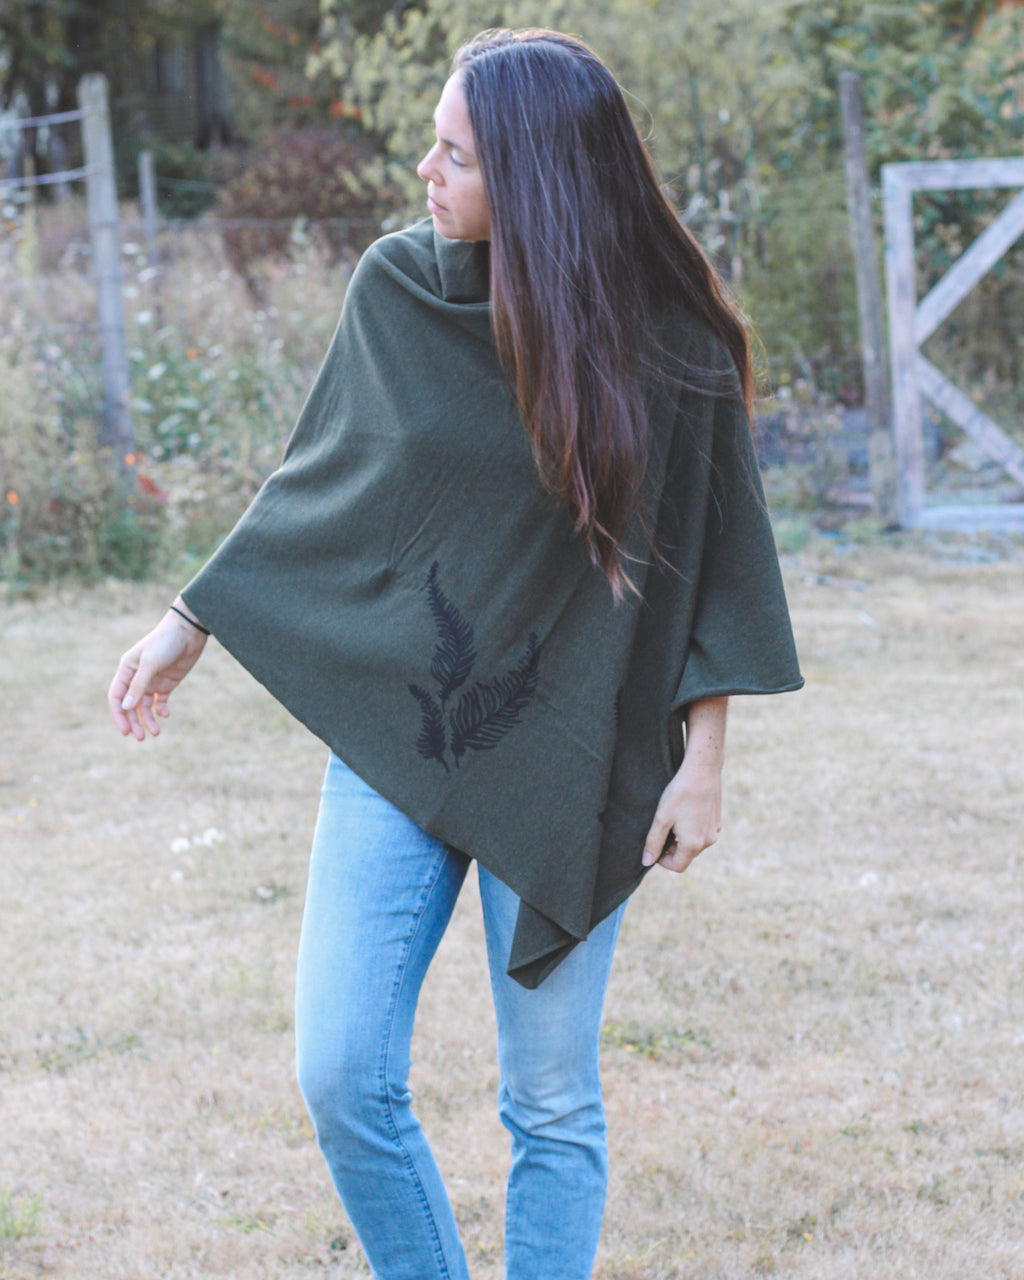 Forest Green Tencel Poncho with Fern Print